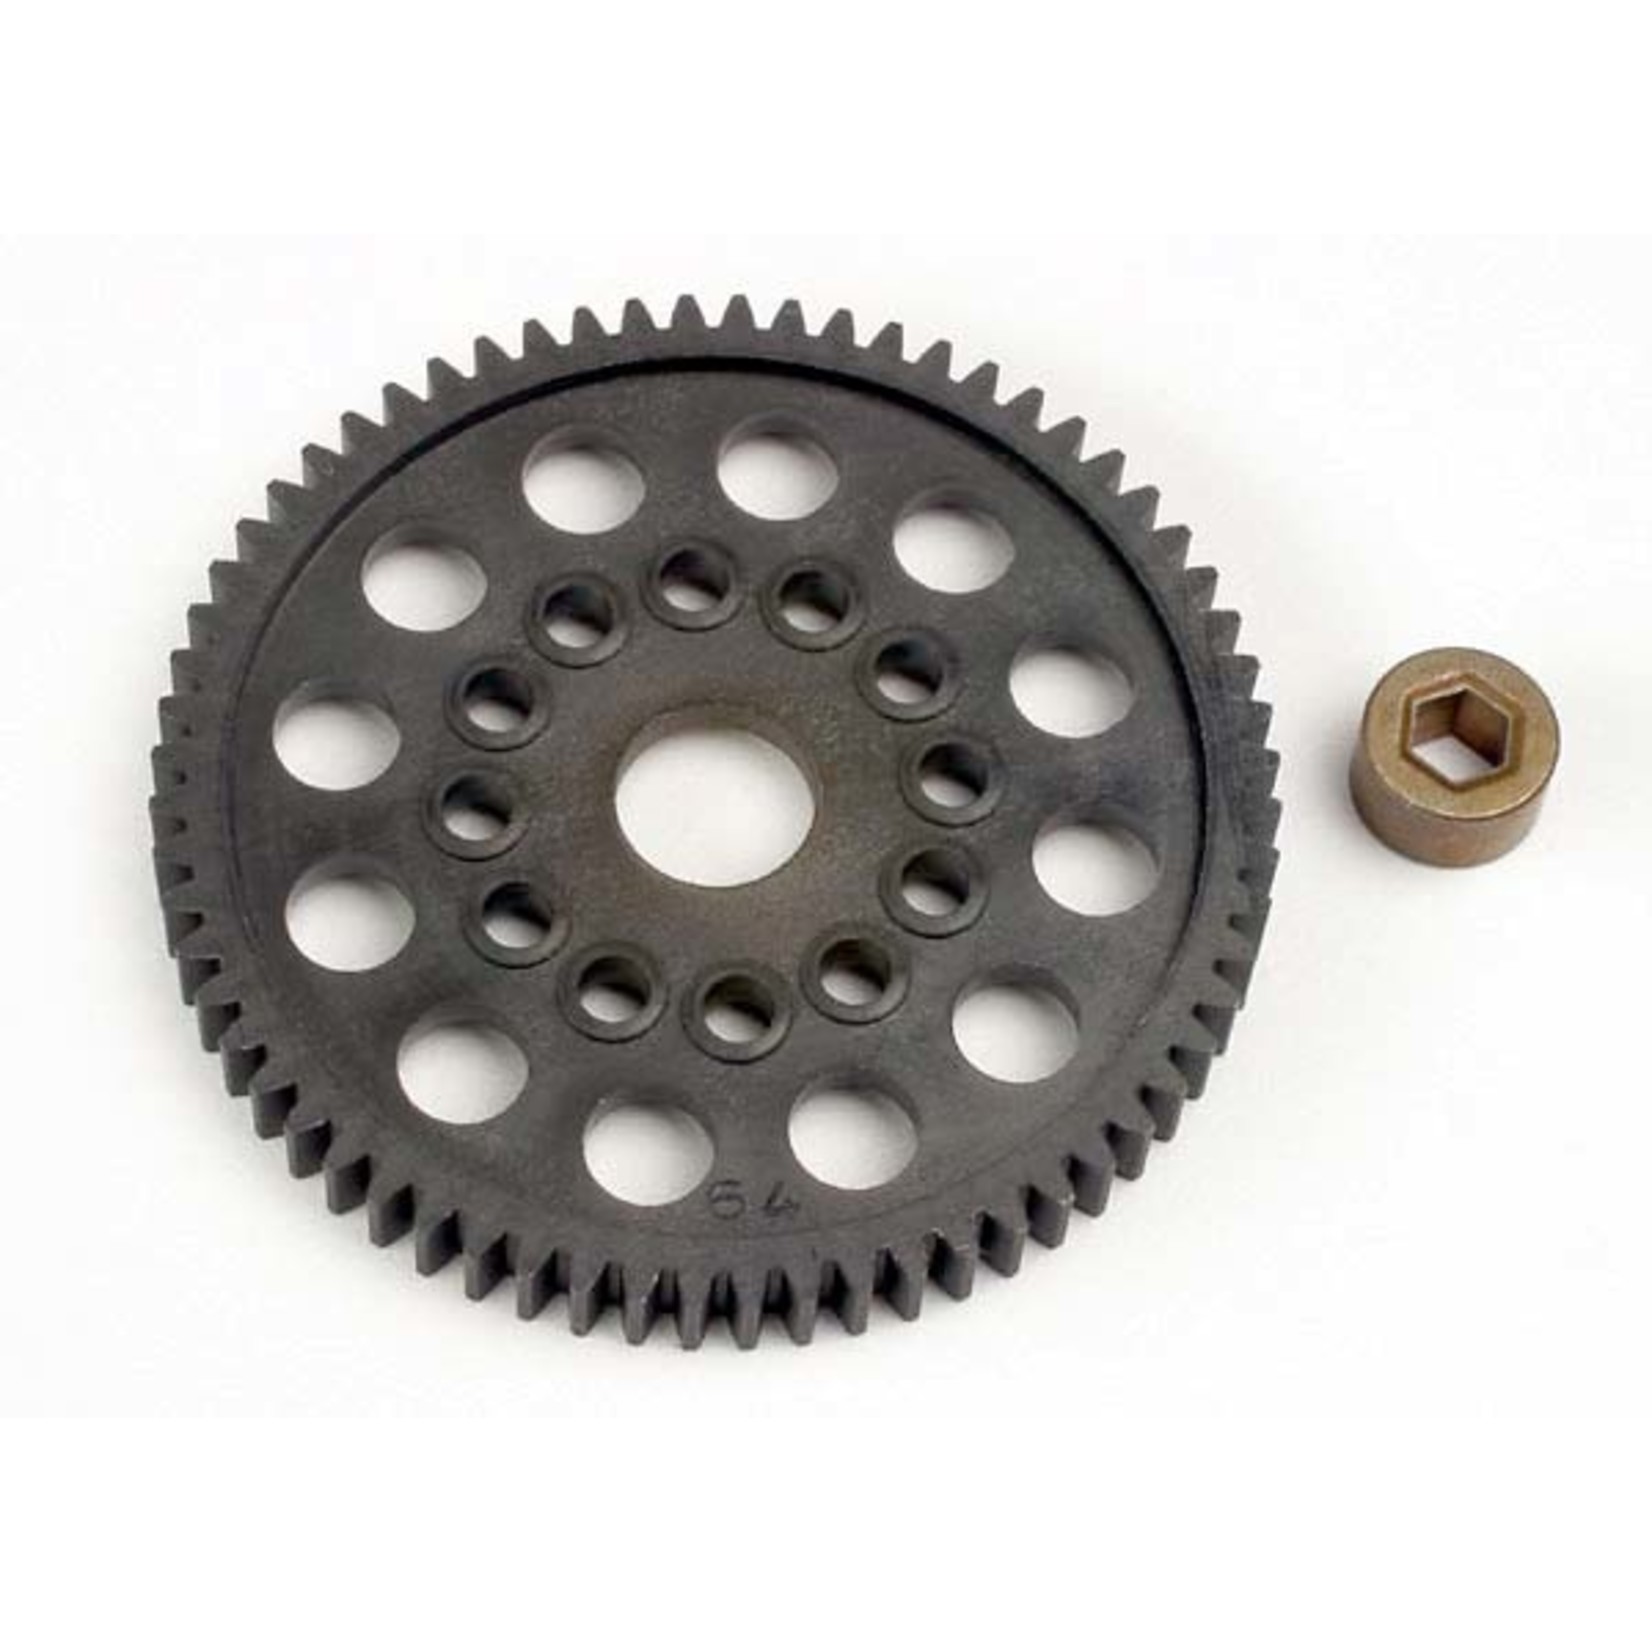 Traxxas 3164 - Spur gear (64-Tooth) (32-Pitch) w/bushing